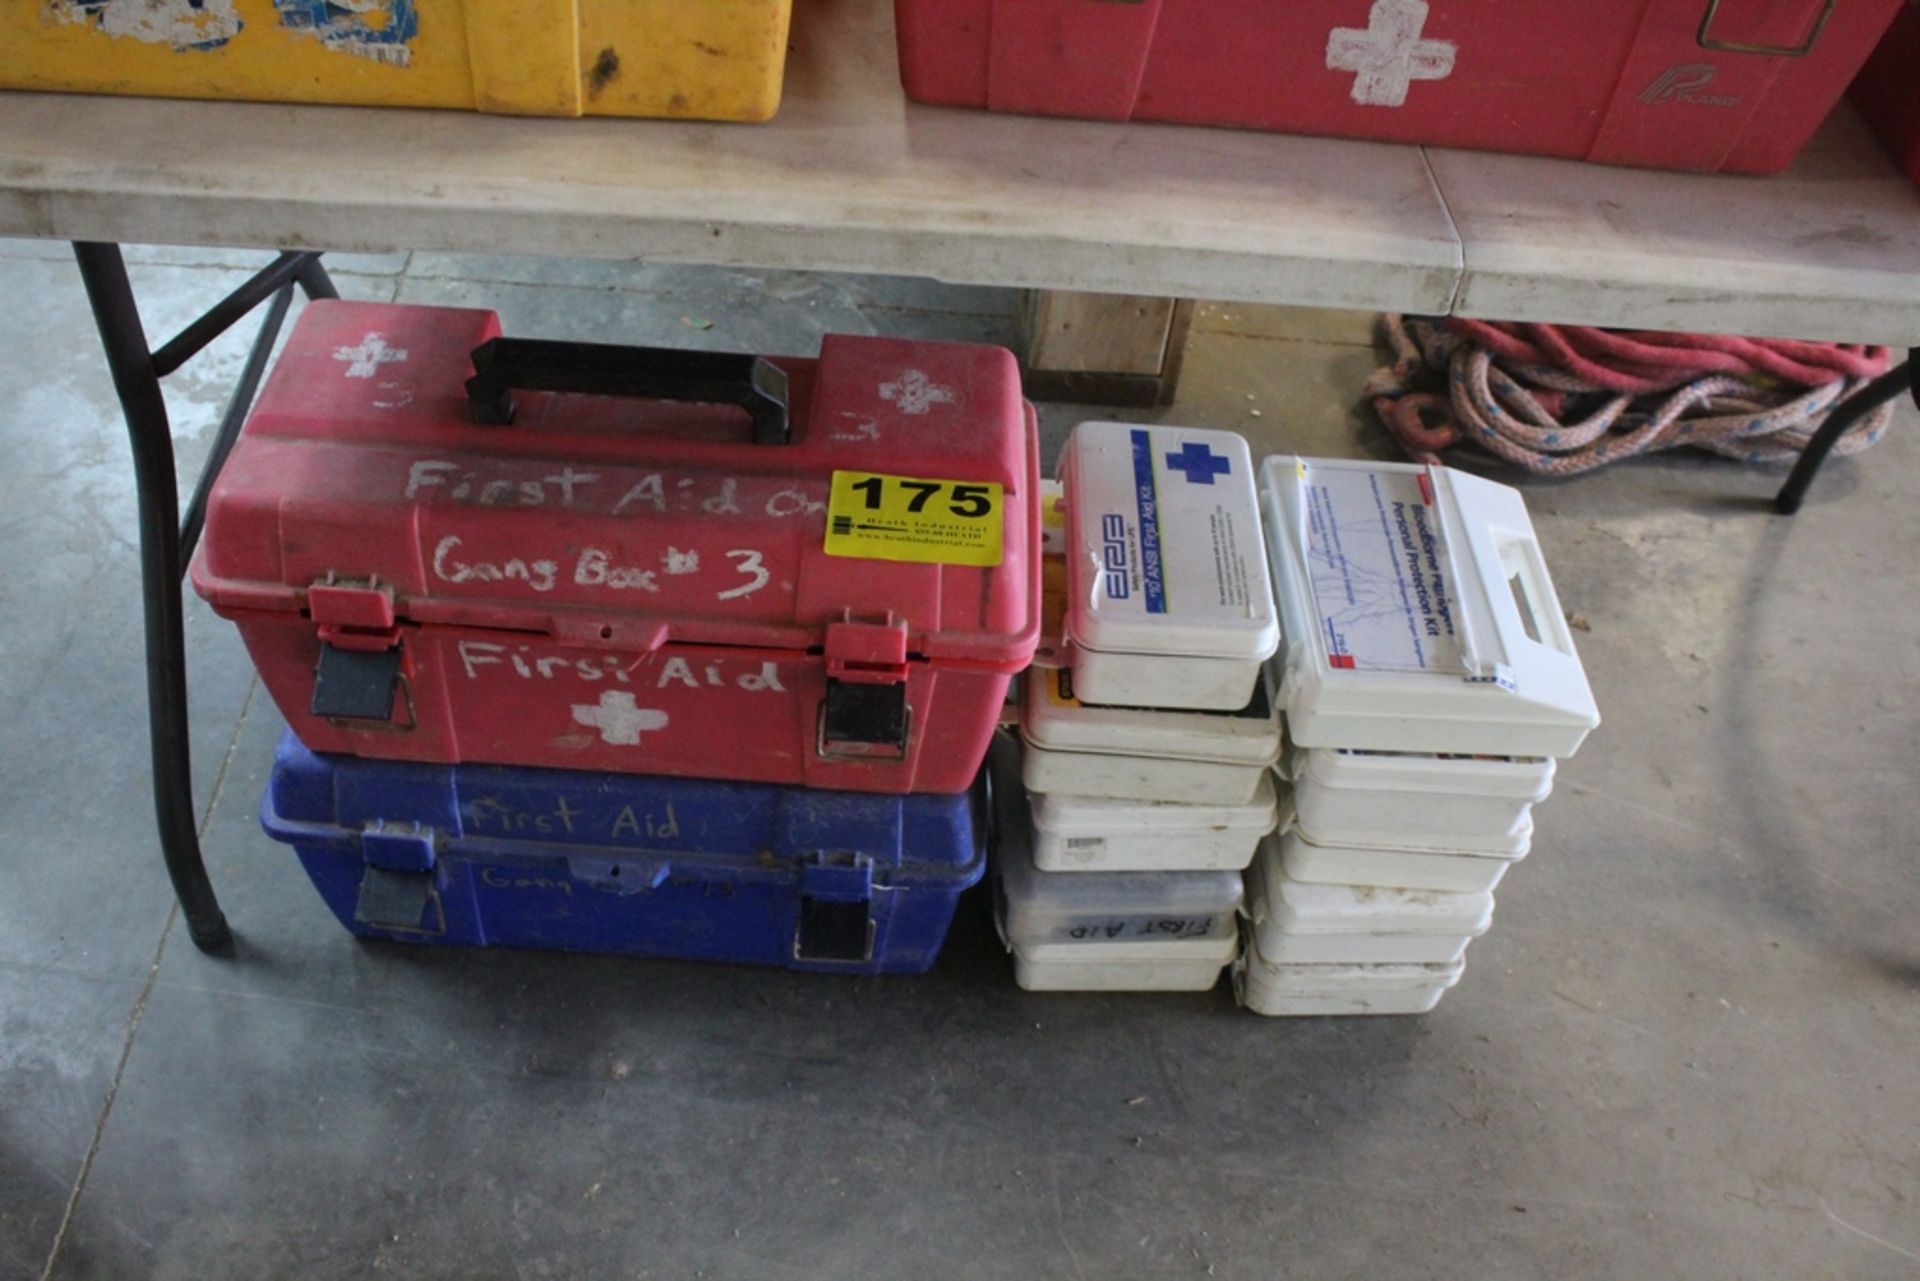 (2) PLASTIC TOOL BOXES AND FIRST AID KITS